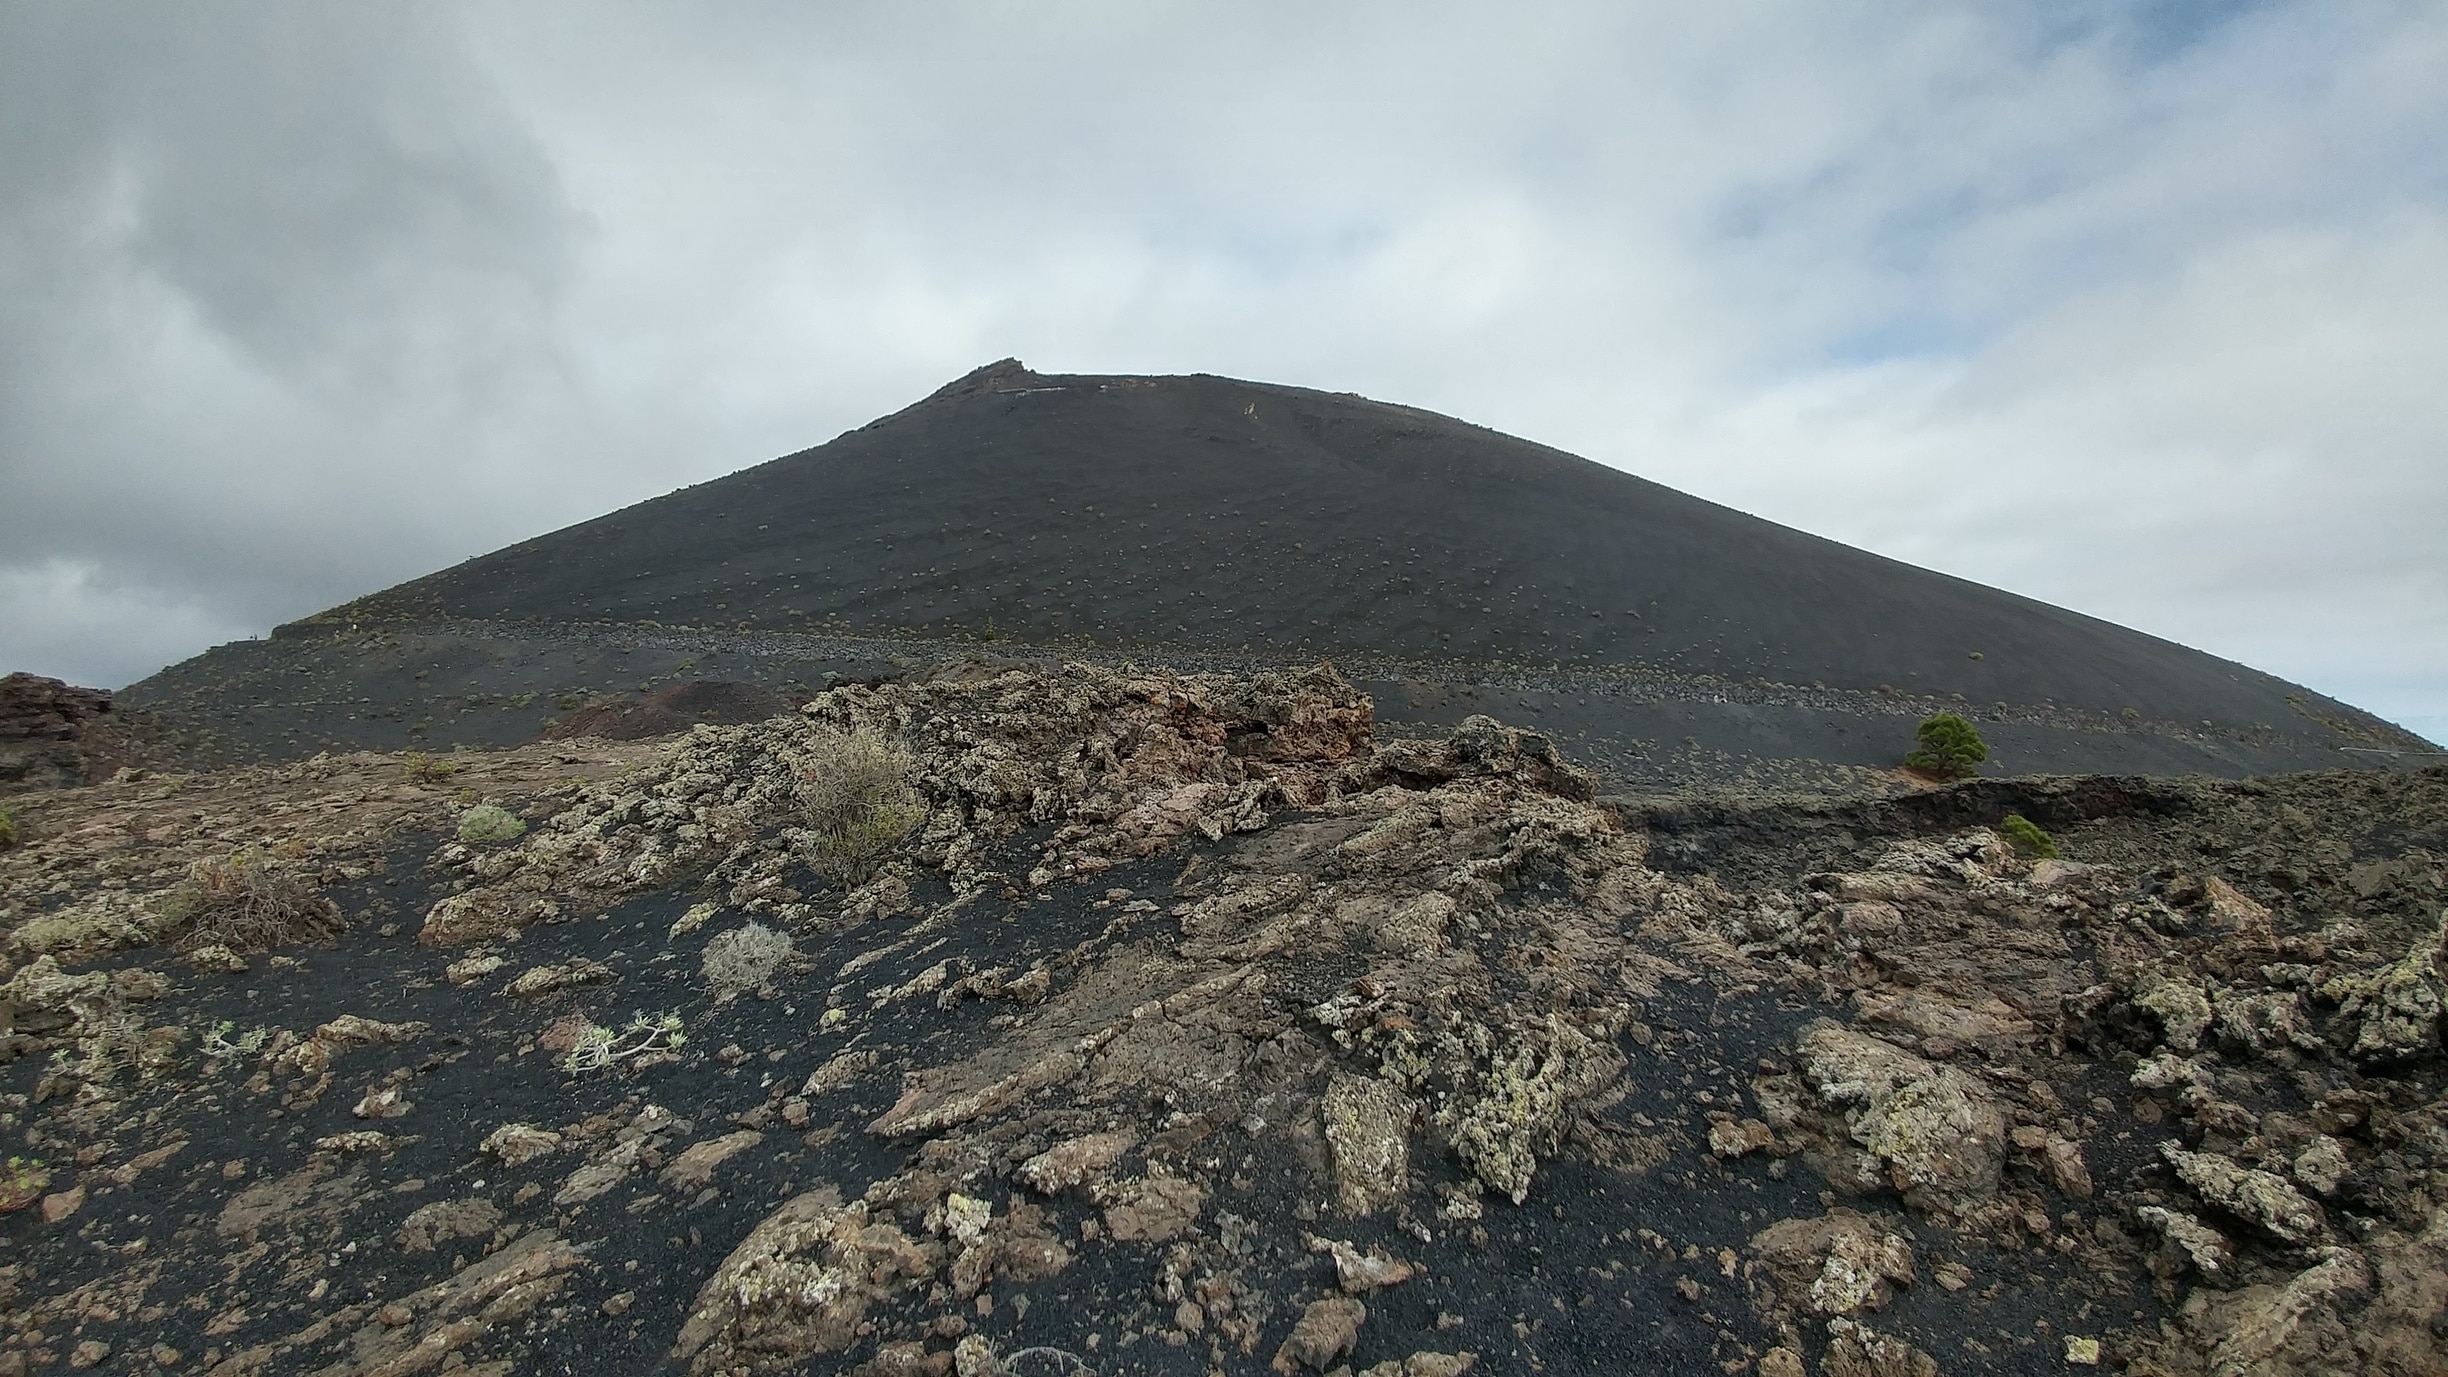 Another view of Volcan San Antonio, near Fuencaliente, Canary Islands. From here you can hiking trail to another Volcan Teneguia, and then follow to the coast to see lighthouse and Salisbury de Fuencaliente 